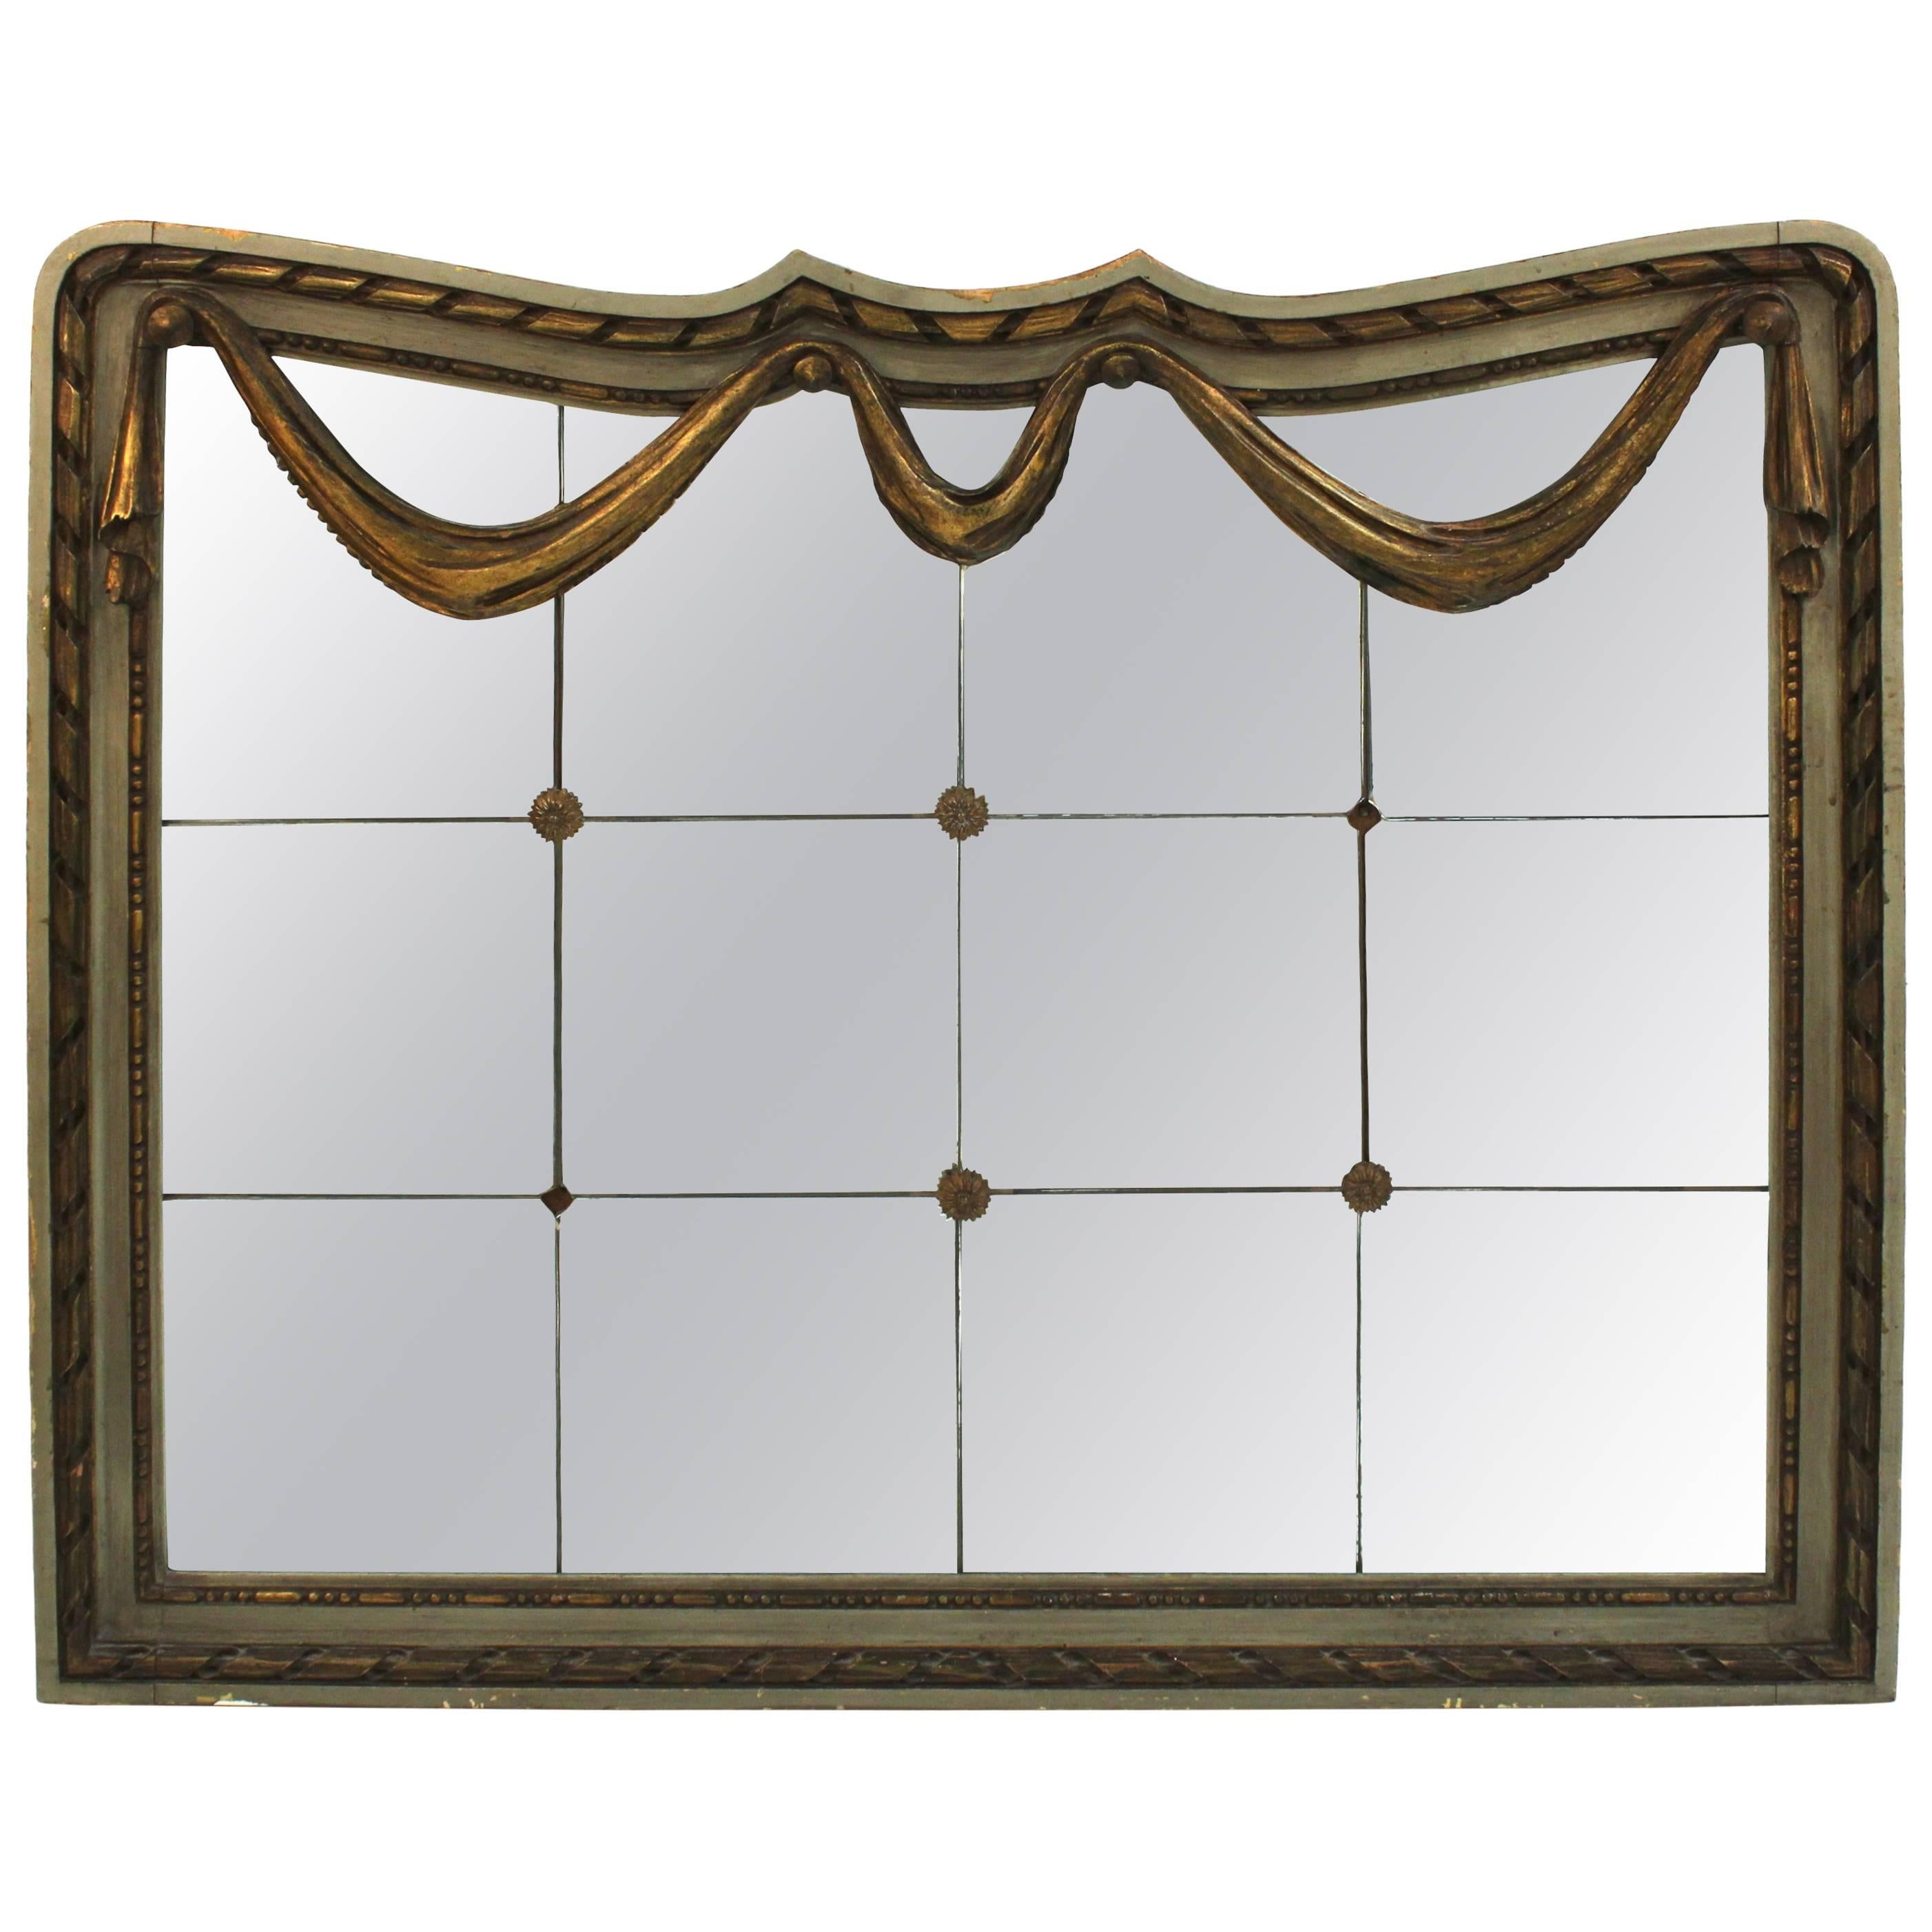 Art Deco Style Mirror with Divided Mirror Panels, Rosettes, and Swag Motif